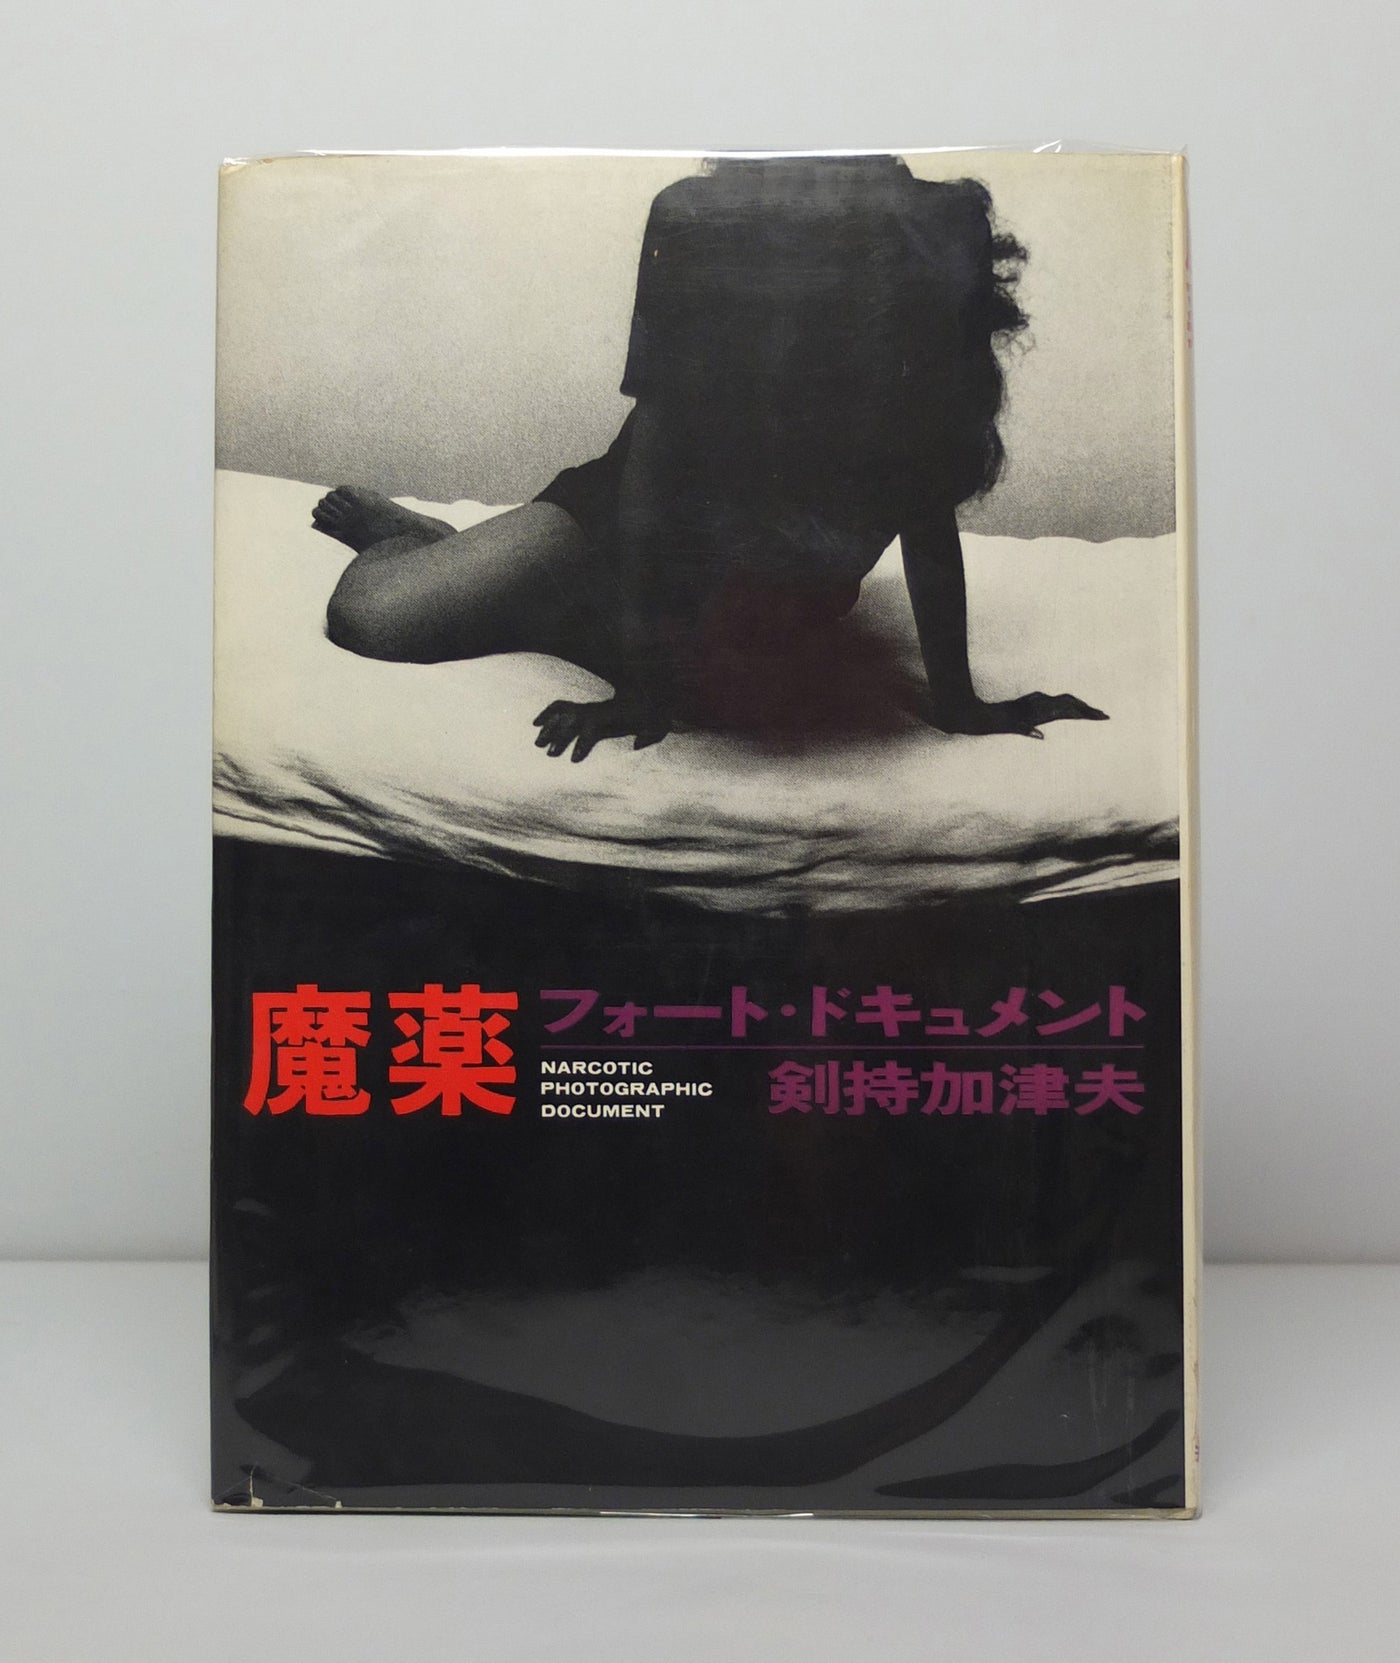 Narcotic Photographic Document by Kazuo Kenmochi}